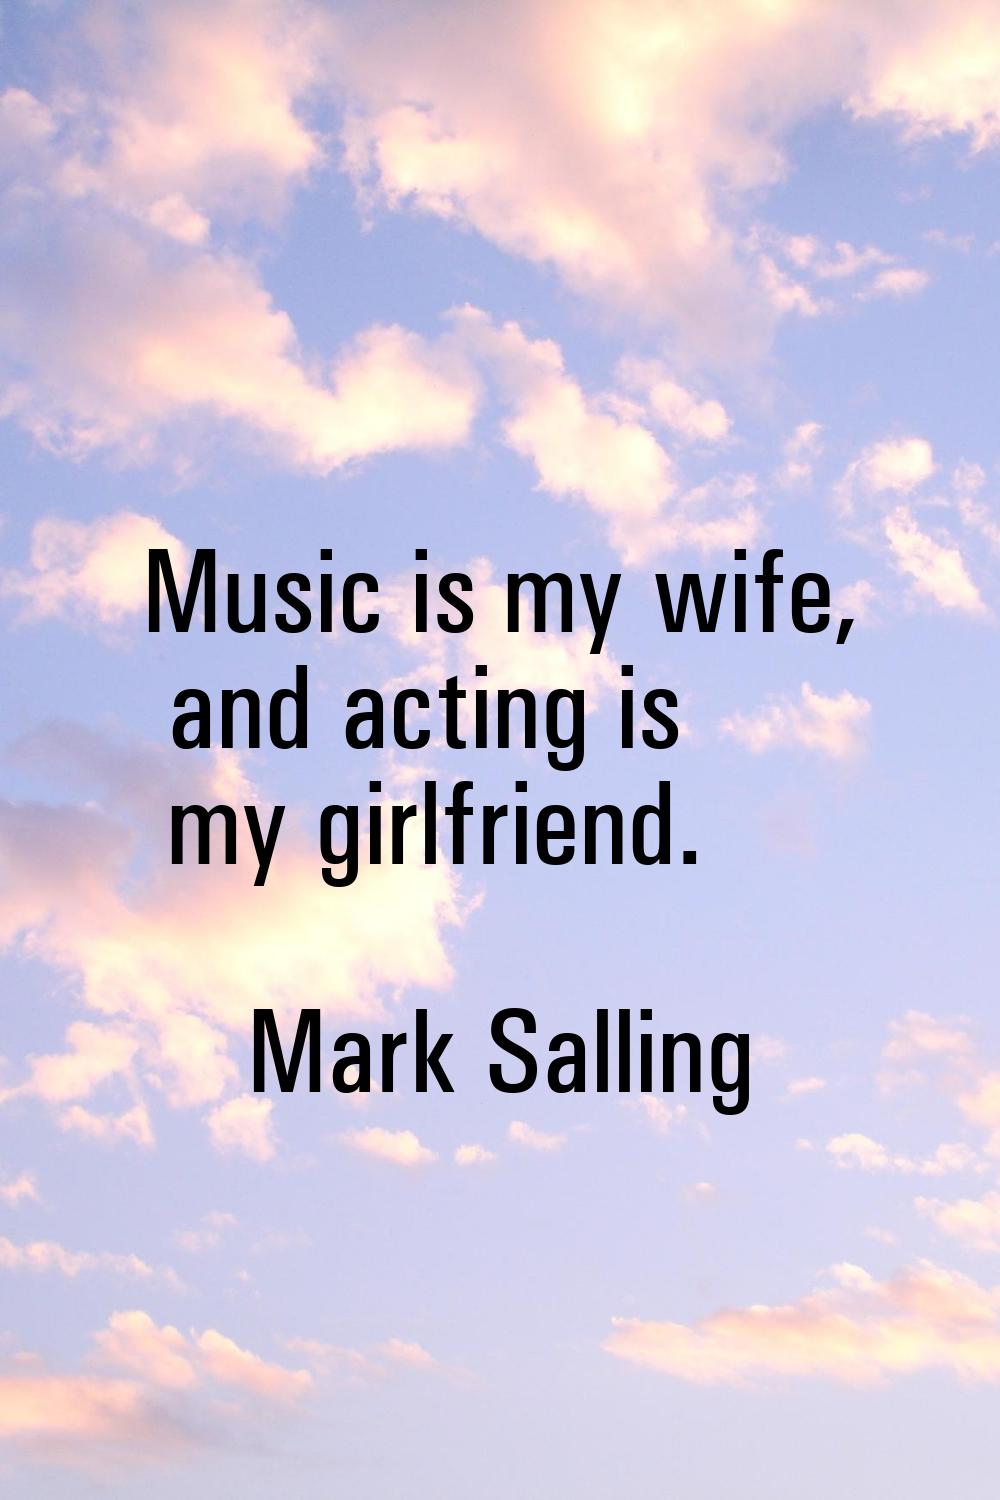 Music is my wife, and acting is my girlfriend.